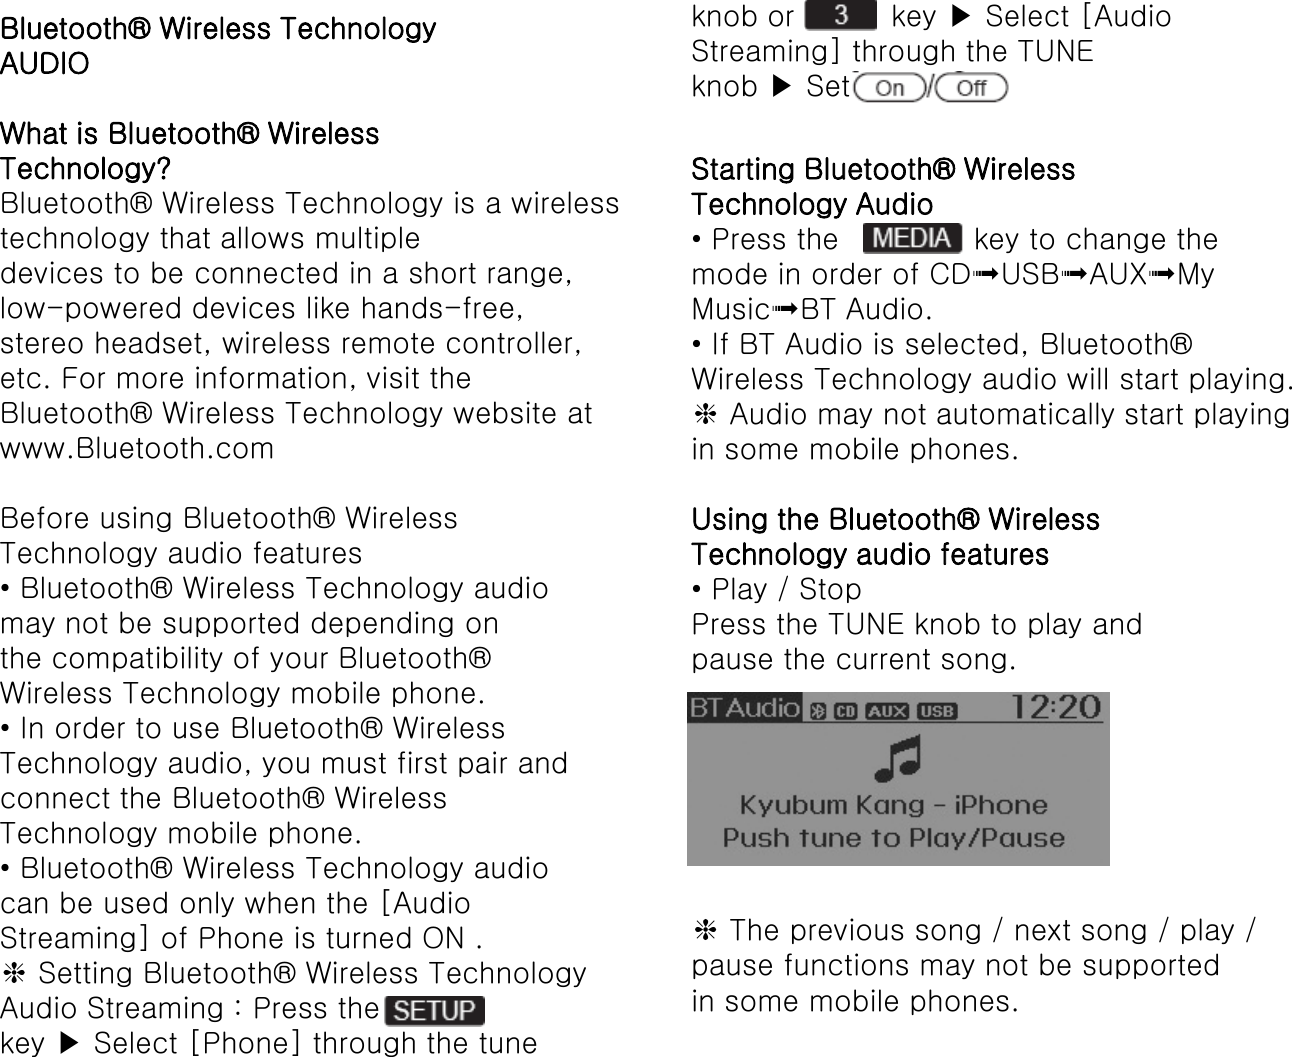 Bluetooth® Wireless Technology AUDIO  What is Bluetooth® Wireless Technology? Bluetooth® Wireless Technology is a wireless technology that allows multiple devices to be connected in a short range, low-powered devices like hands-free, stereo headset, wireless remote controller, etc. For more information, visit the Bluetooth® Wireless Technology website at www.Bluetooth.com  Before using Bluetooth® Wireless Technology audio features • Bluetooth® Wireless Technology audio may not be supported depending on the compatibility of your Bluetooth® Wireless Technology mobile phone. • In order to use Bluetooth® Wireless Technology audio, you must first pair and connect the Bluetooth® Wireless Technology mobile phone. • Bluetooth® Wireless Technology audio can be used only when the [Audio Streaming] of Phone is turned ON . ❈ Setting Bluetooth® Wireless Technology Audio Streaming : Press the  key ▶ Select [Phone] through the tune knob or          key ▶ Select [Audio Streaming] through the TUNE knob ▶ Set Starting Bluetooth® Wireless Technology Audio • Press the              key to change the mode in order of CD➟USB➟AUX➟My Music➟BT Audio. • If BT Audio is selected, Bluetooth® Wireless Technology audio will start playing. ❈ Audio may not automatically start playing in some mobile phones.  Using the Bluetooth® Wireless Technology audio features • Play / Stop Press the TUNE knob to play and pause the current song. ❈ The previous song / next song / play / pause functions may not be supported in some mobile phones. 